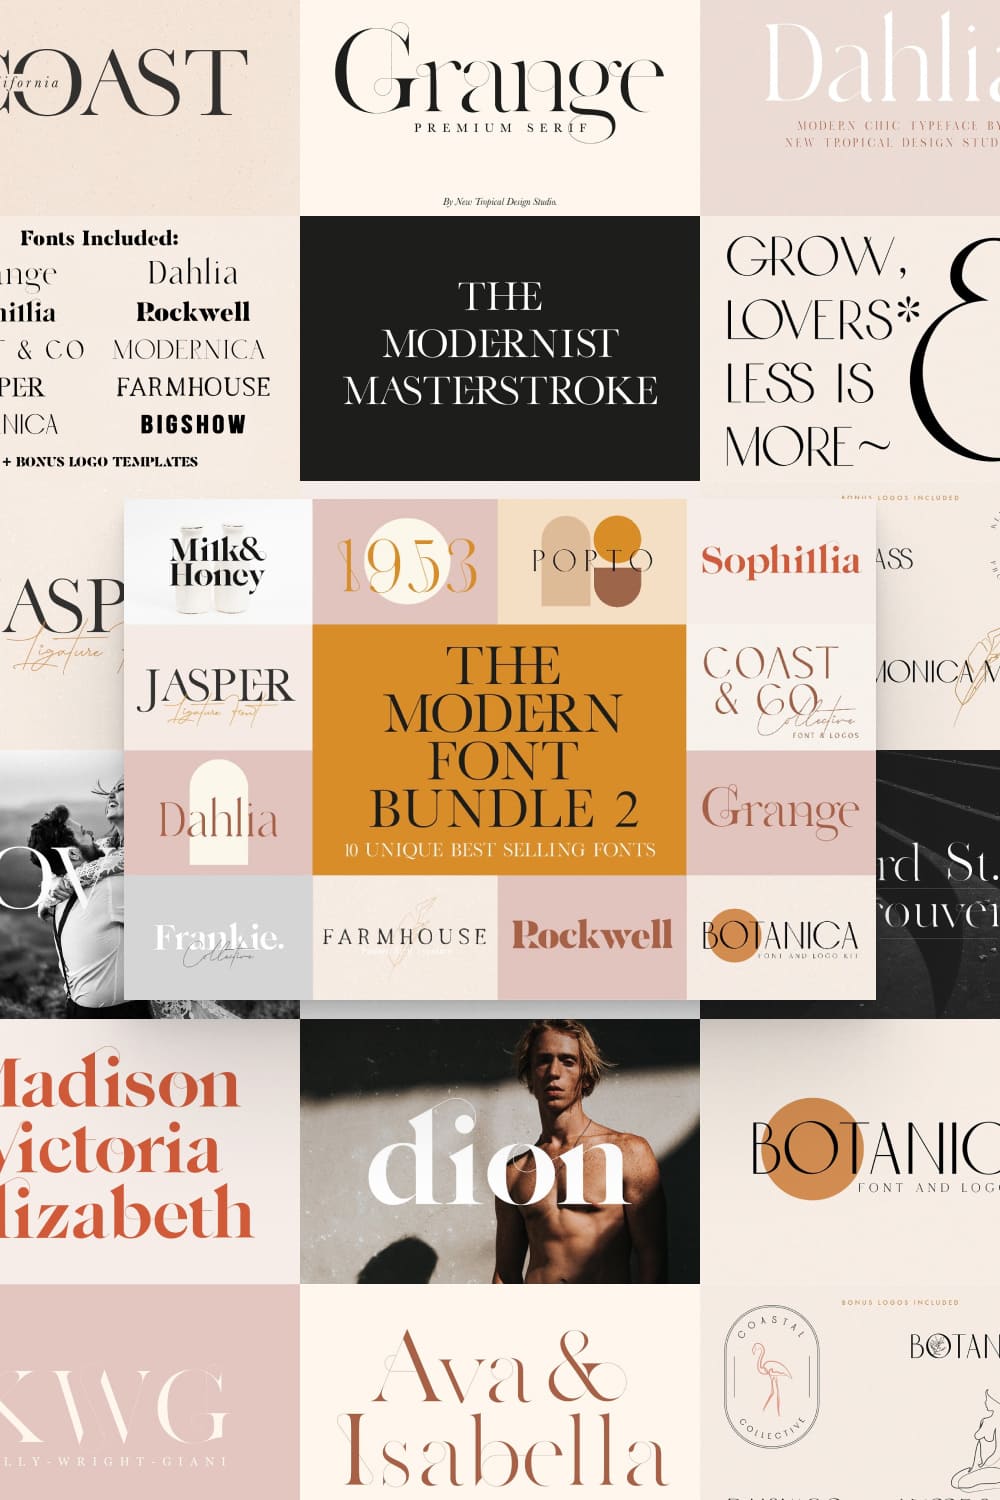 There are ten super unique fonts that are guaranteed to stand out while keeping those modern chic vibes.